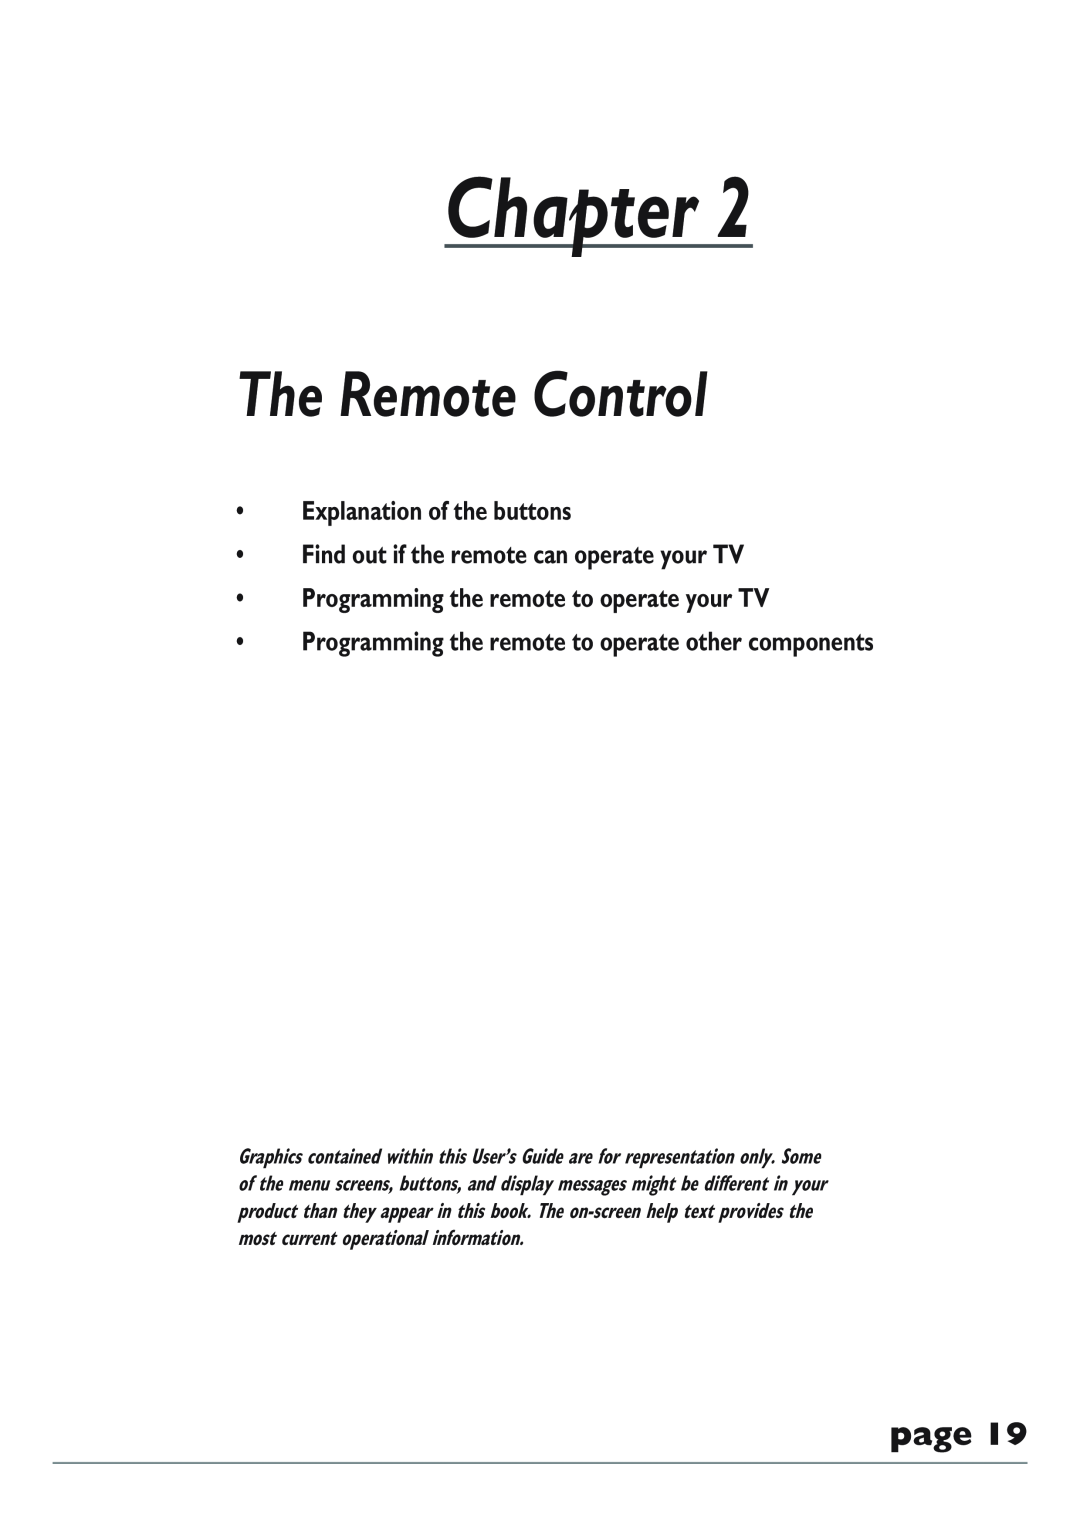 RCA DRC8300N Chapter, The Remote Control, page, Explanation of the buttons Find out if the remote can operate your TV 